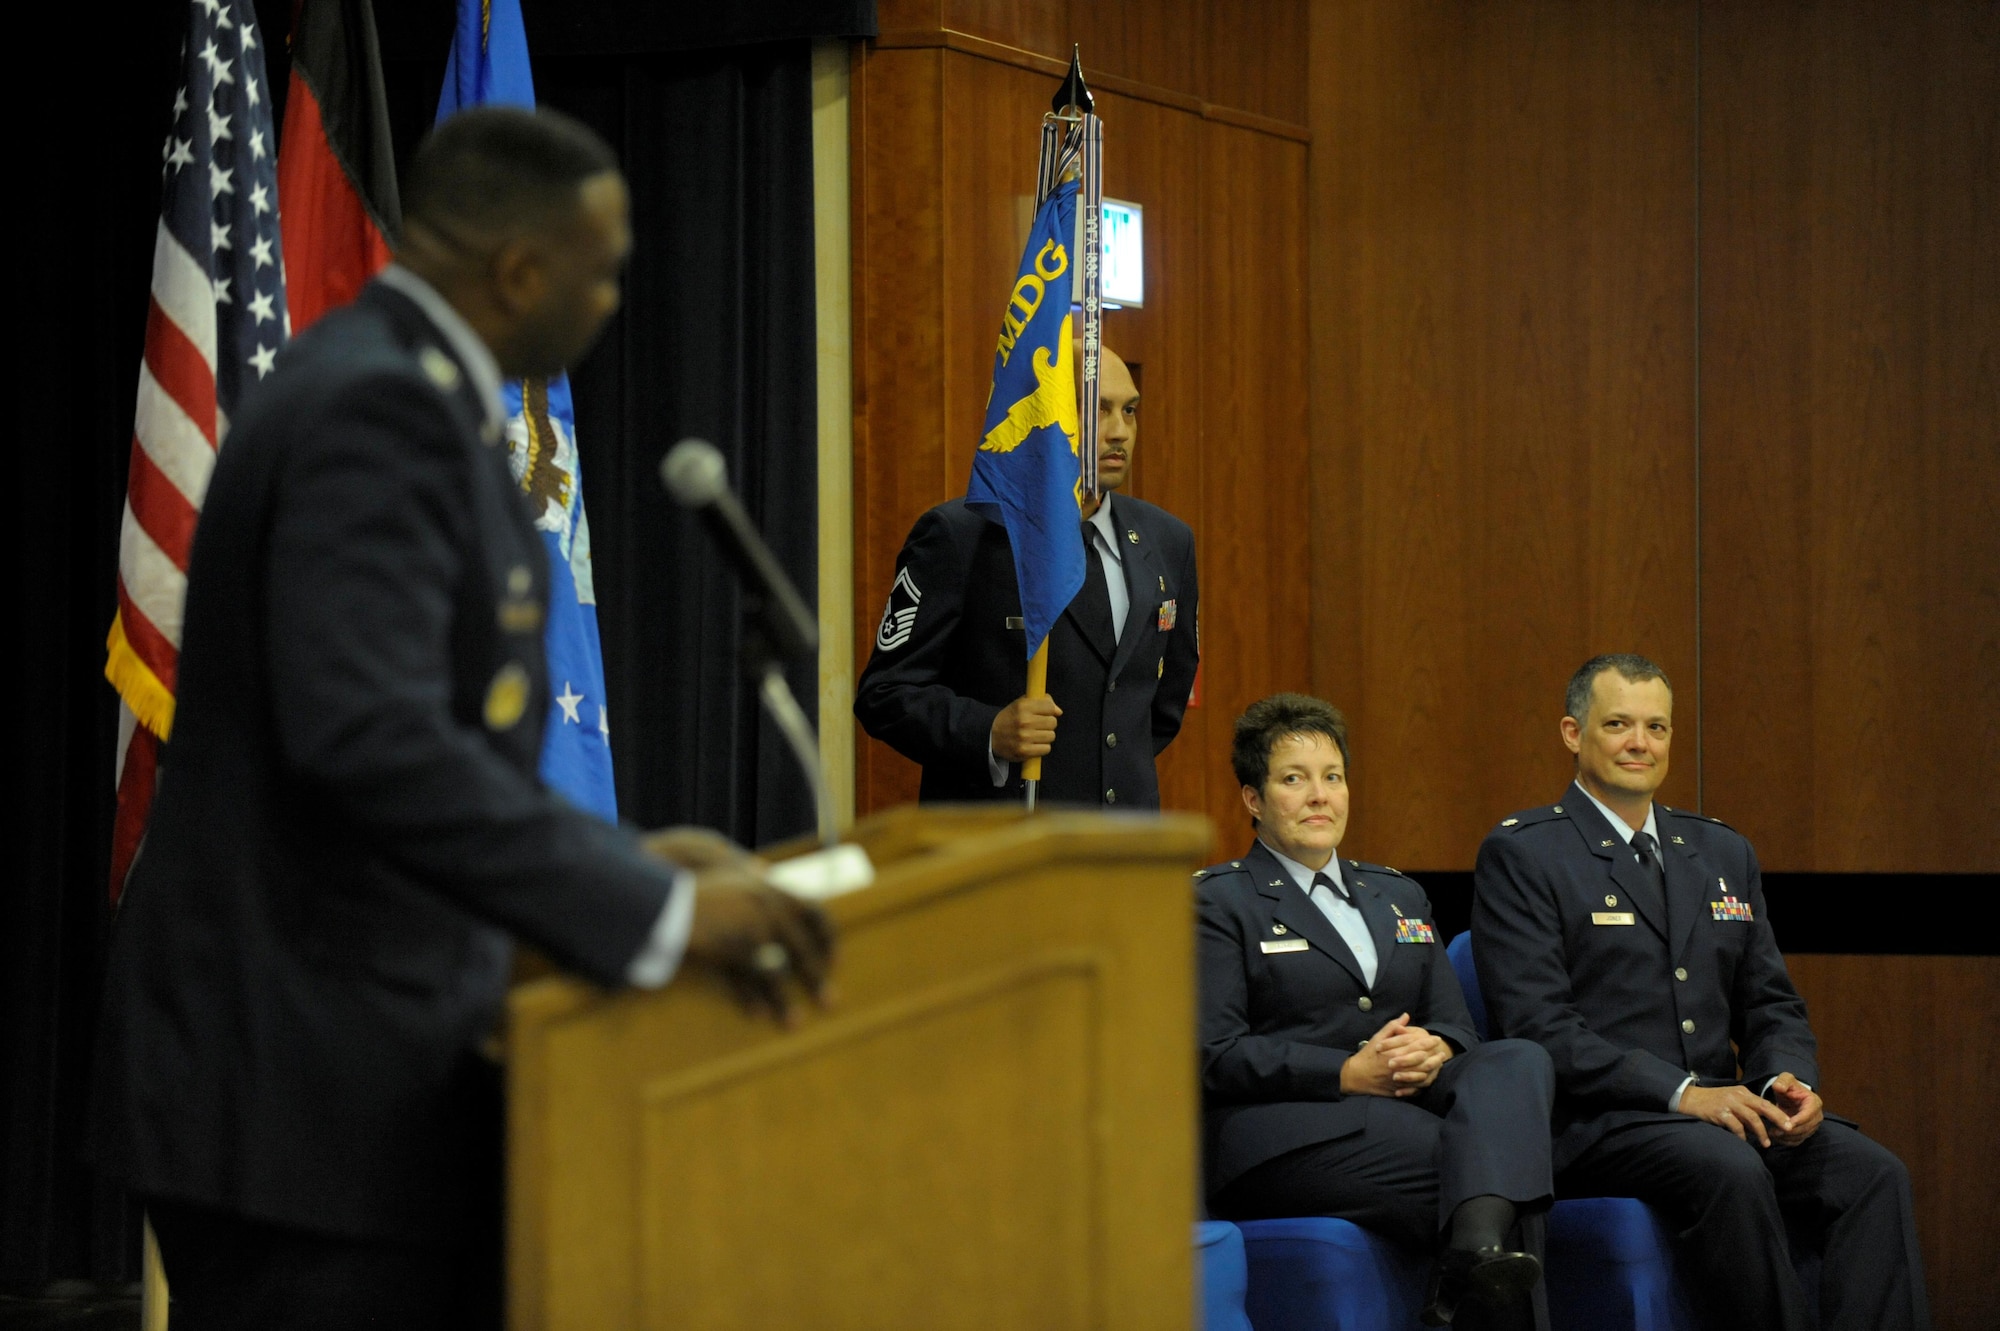 U.S. Air Force Col. Alfred Flowers, 52nd Medical Group commander, speaks during the 52nd DS change of command ceremony on Spangdahlem Air Base, Germany, July 11, 2016. During Flowers speech he says his farewells to Col. Ann Blake and her family as well as welcomed Lt. Col. David Jones and his family. (U.S. Air Force photo by Staff Sgt. Jonathan Snyder/Released)